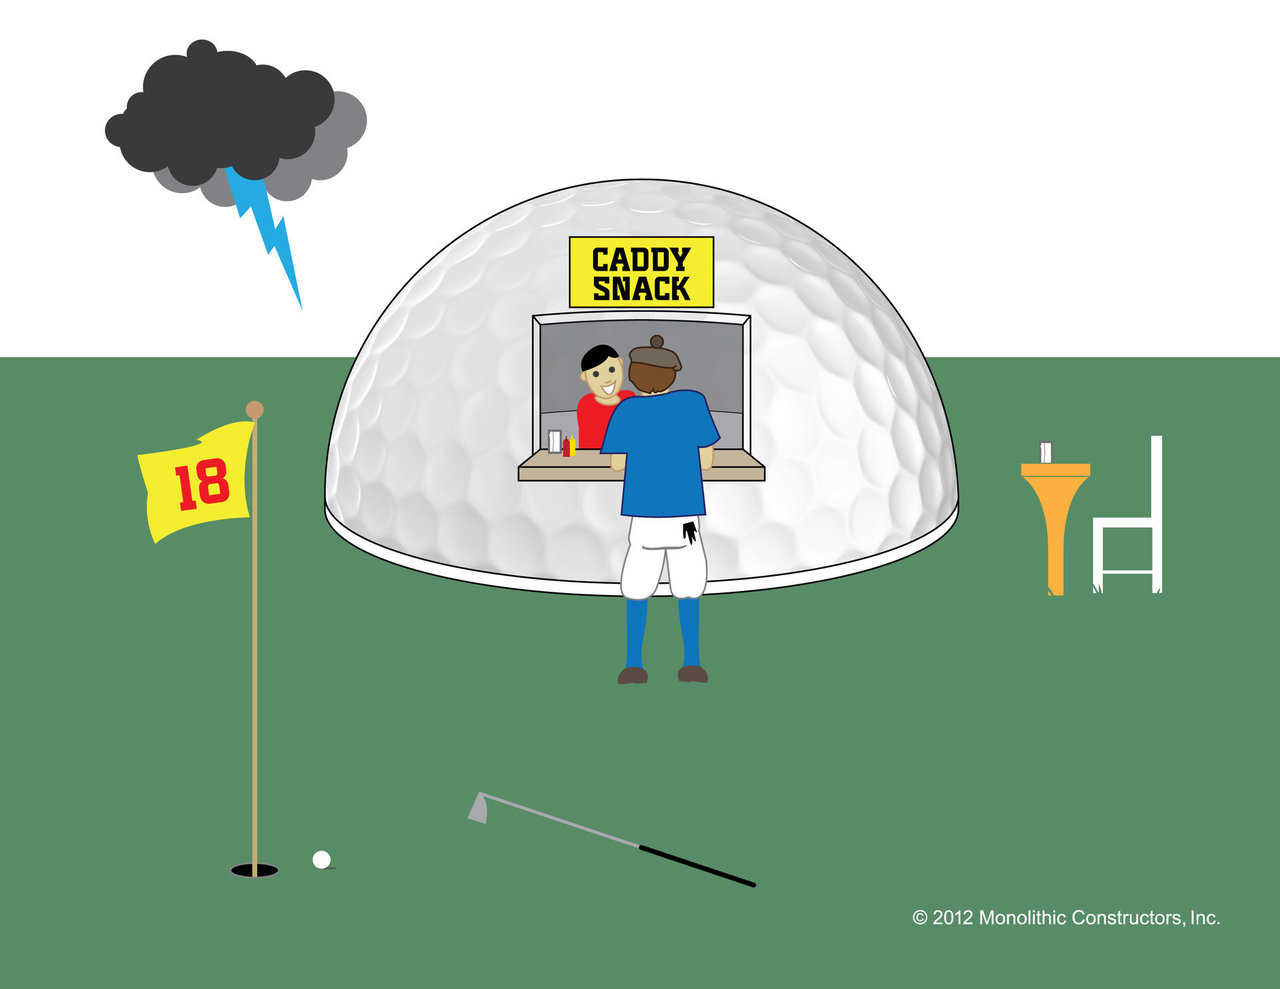 A Monolithic golf concession dome will help keep golfers on course and offer a perfect place to ride out any storm.